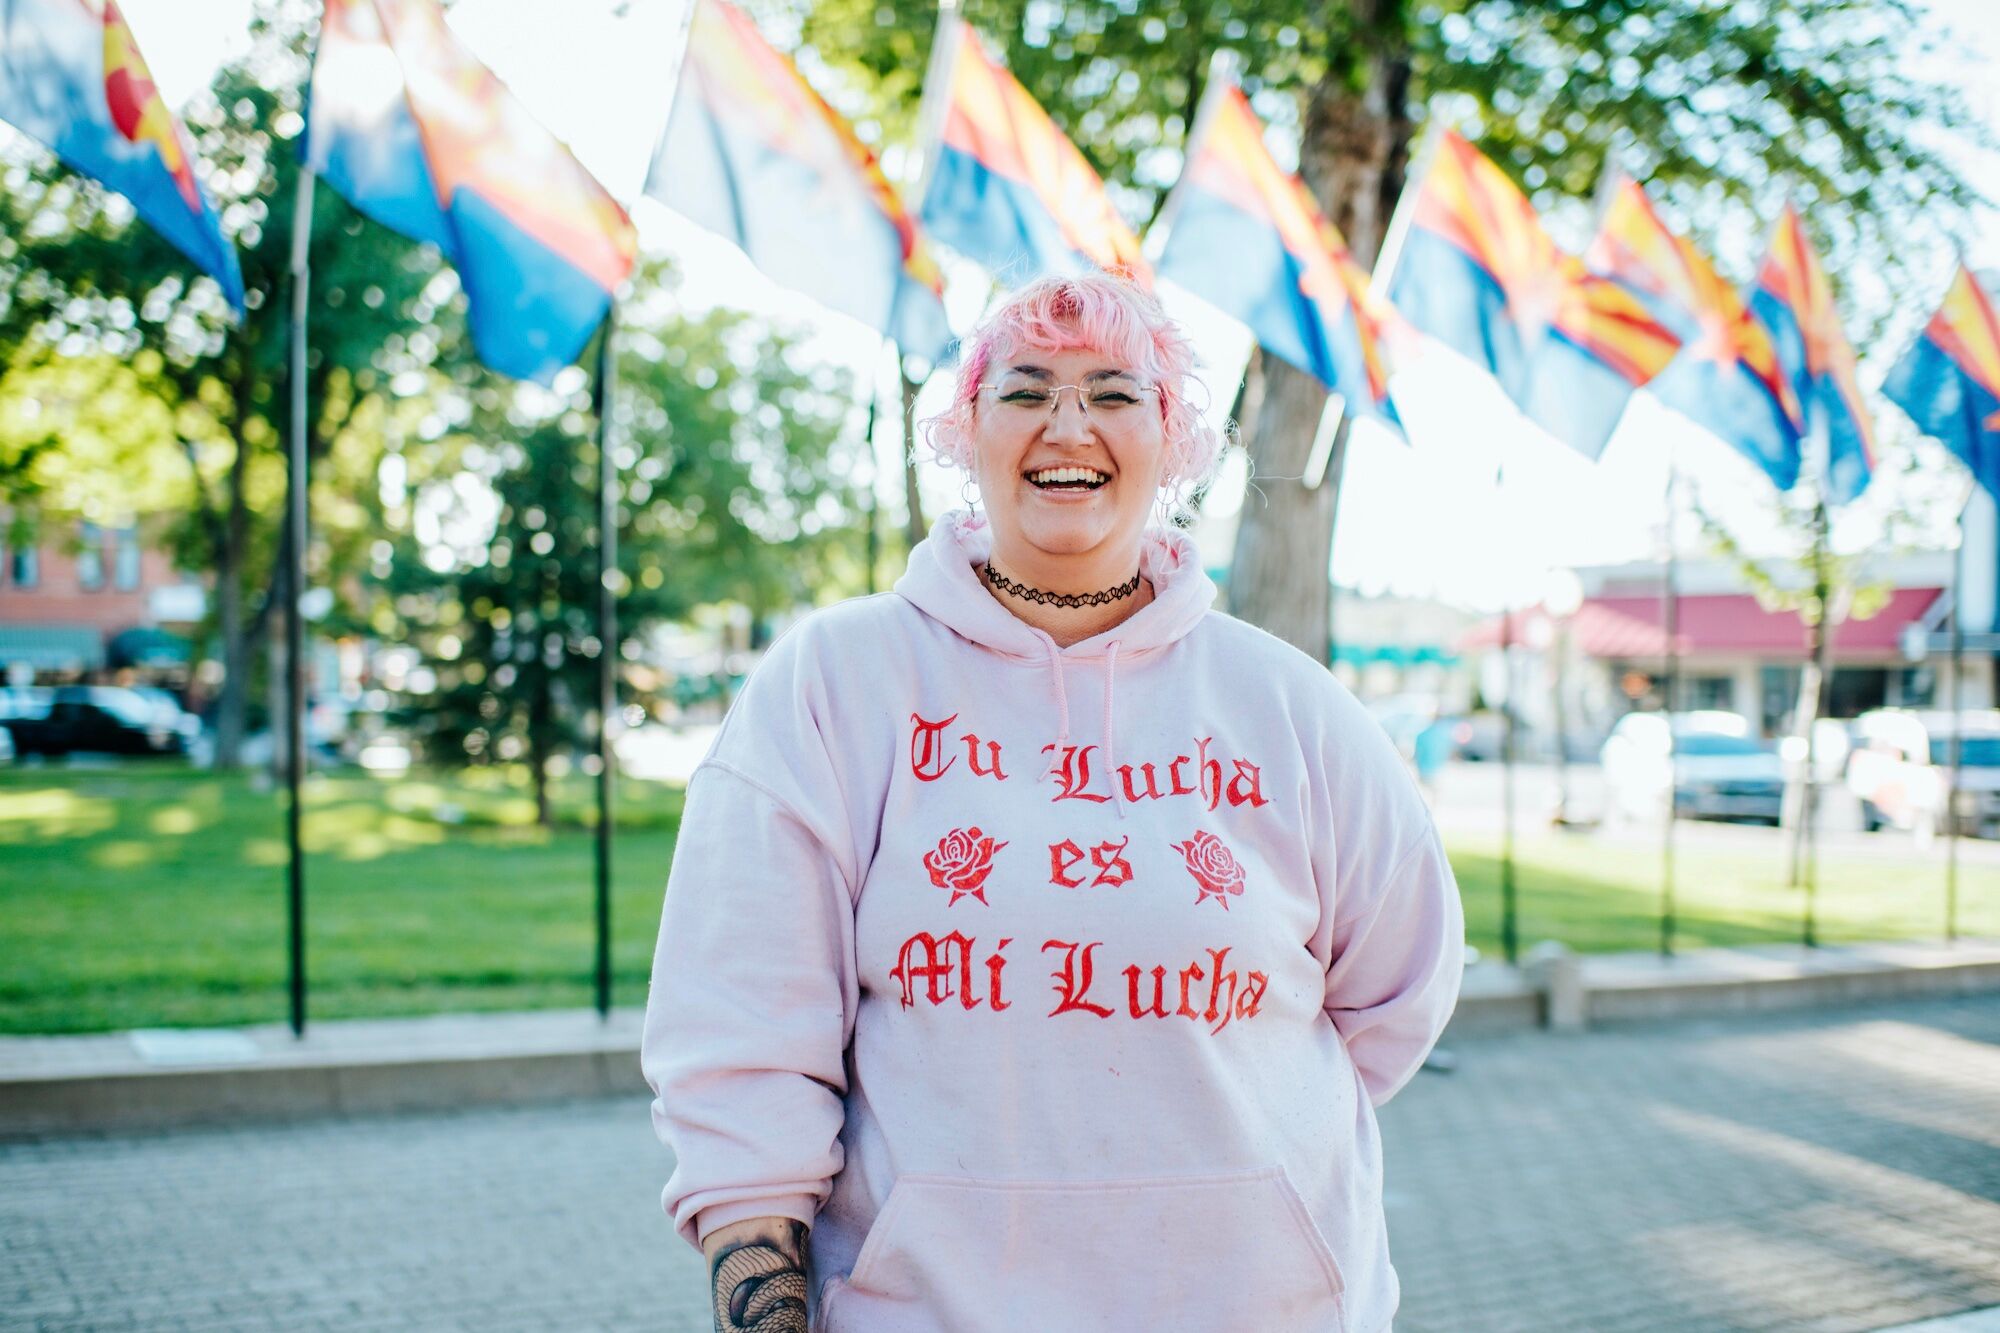 Silvia Ximi wears a sweatshirt she created, which translates to “your struggle is my struggle” in Prescott, Arizona on July 18, 2022. Photo by Parker Micheaels Photography for LGBTQ Nation